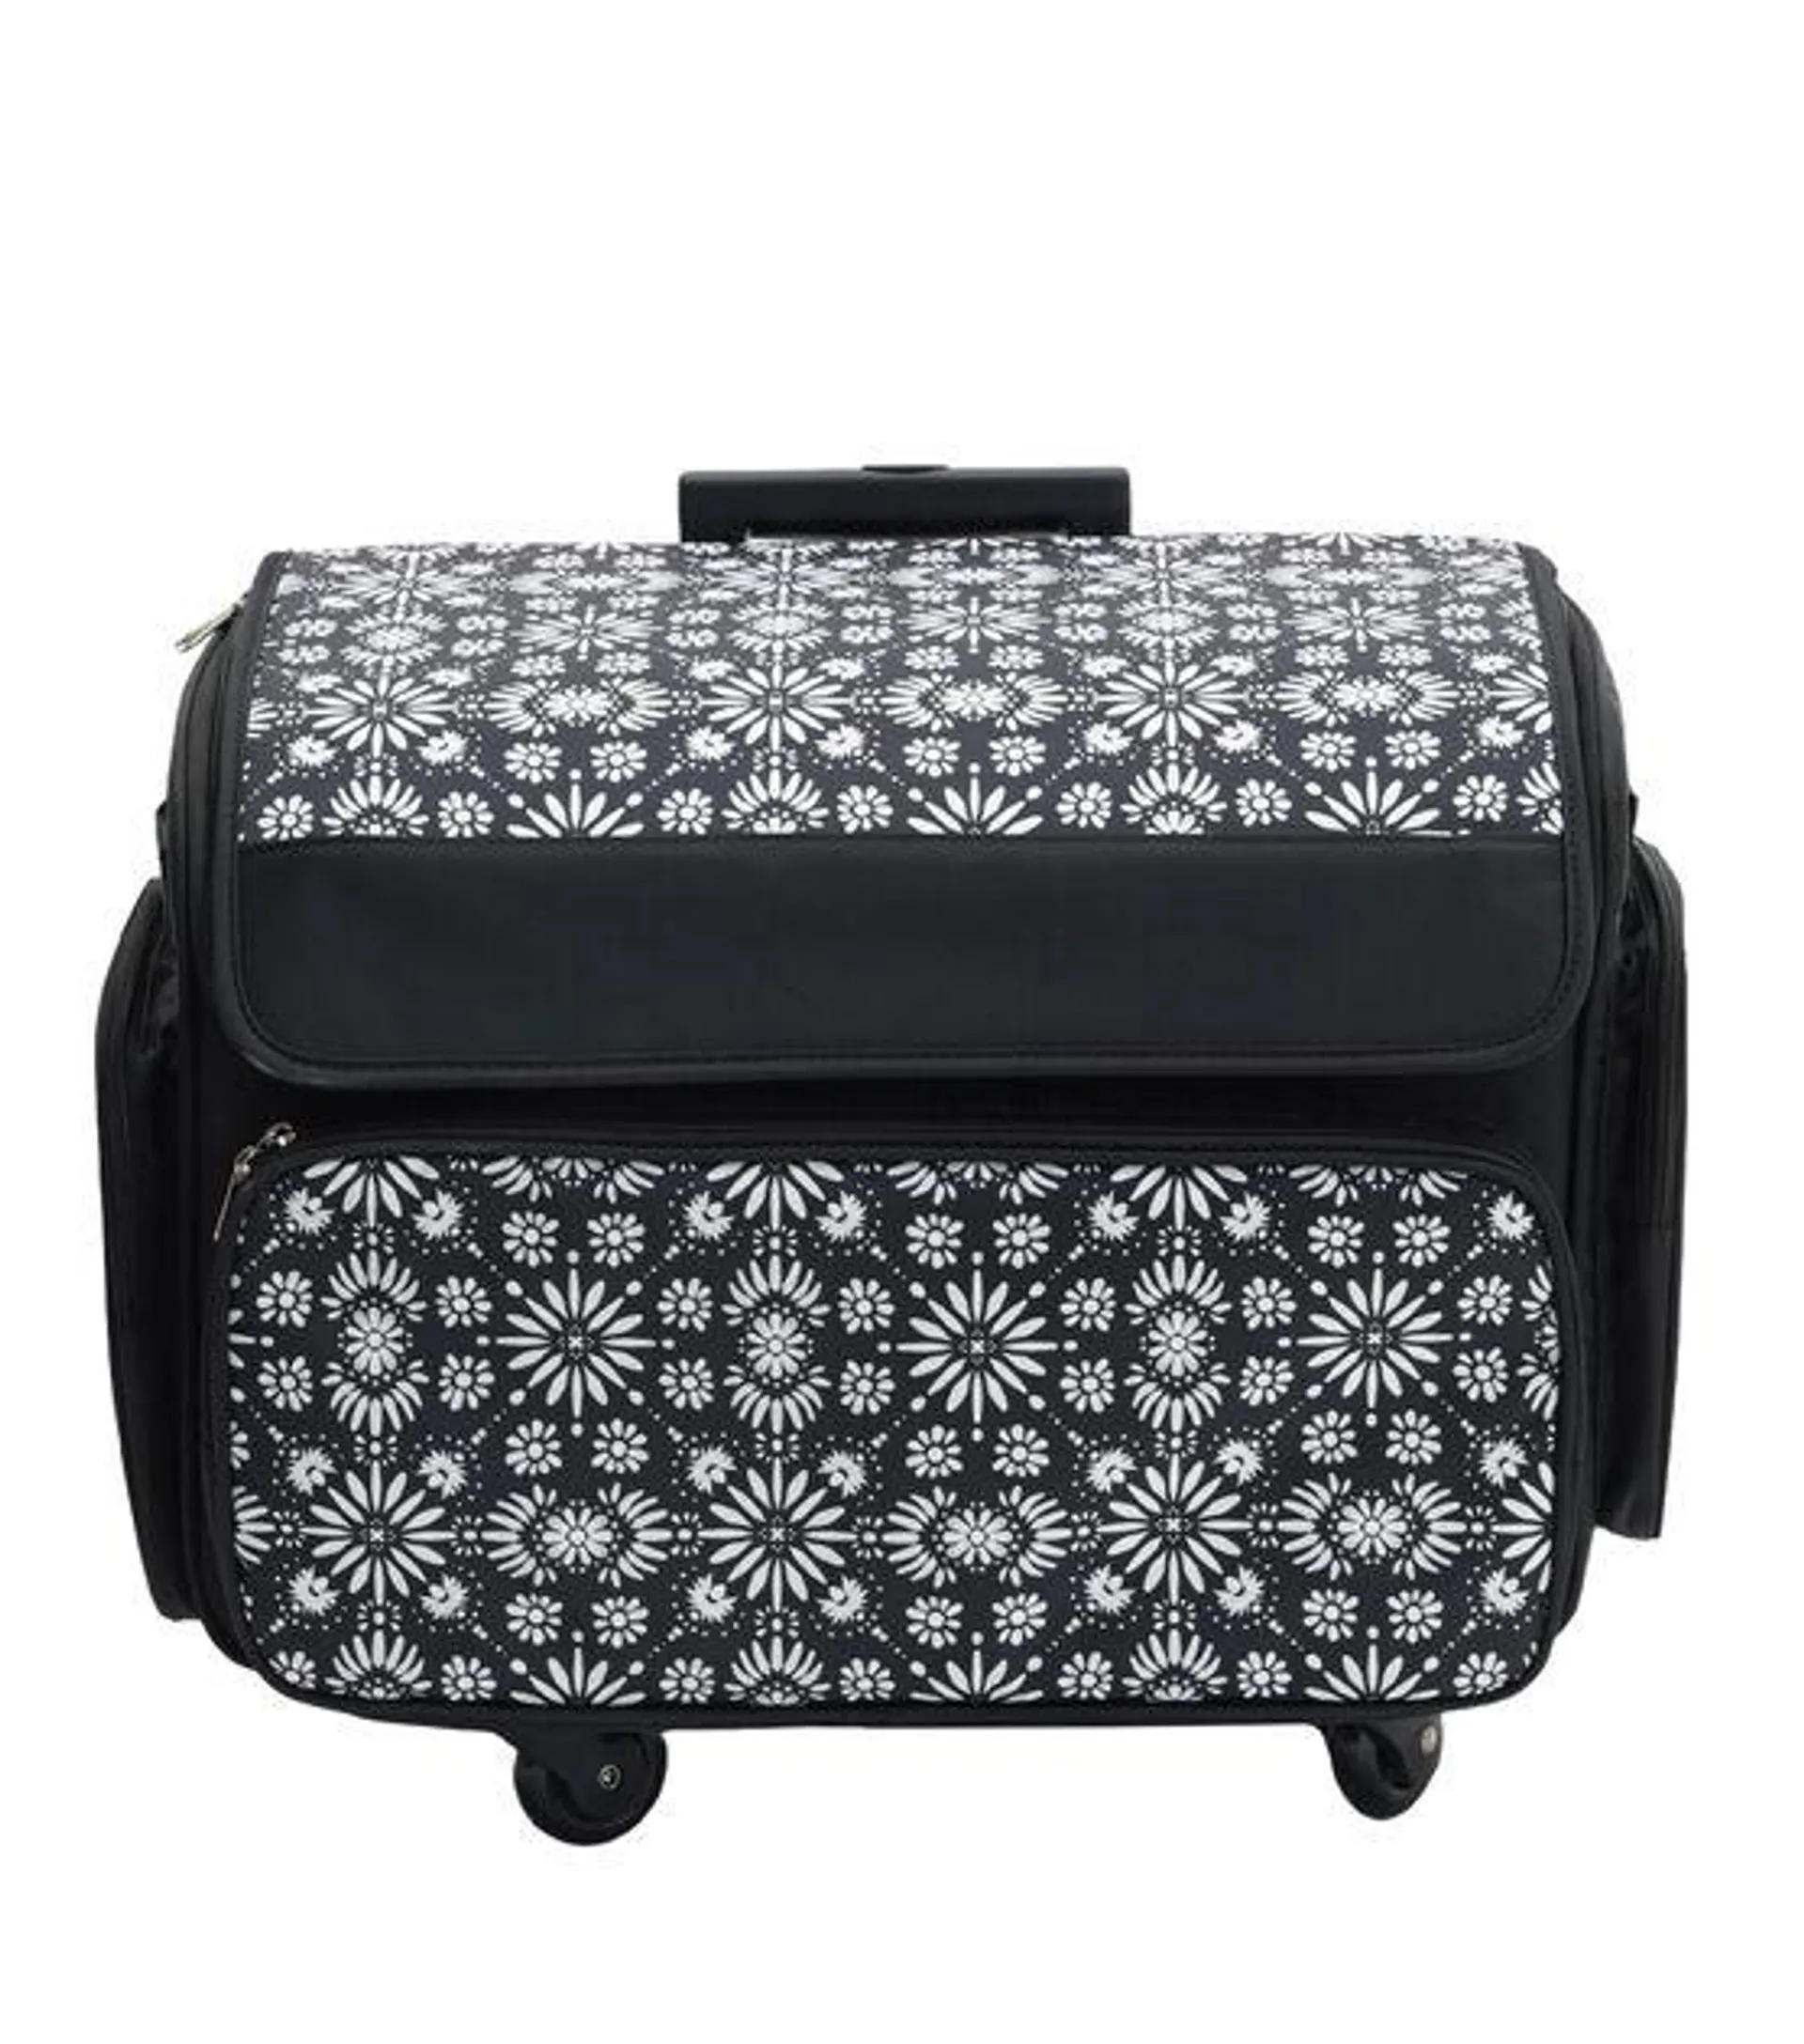 13" Black & White Floral Polyester Rolling Storage Tote by Top Notch